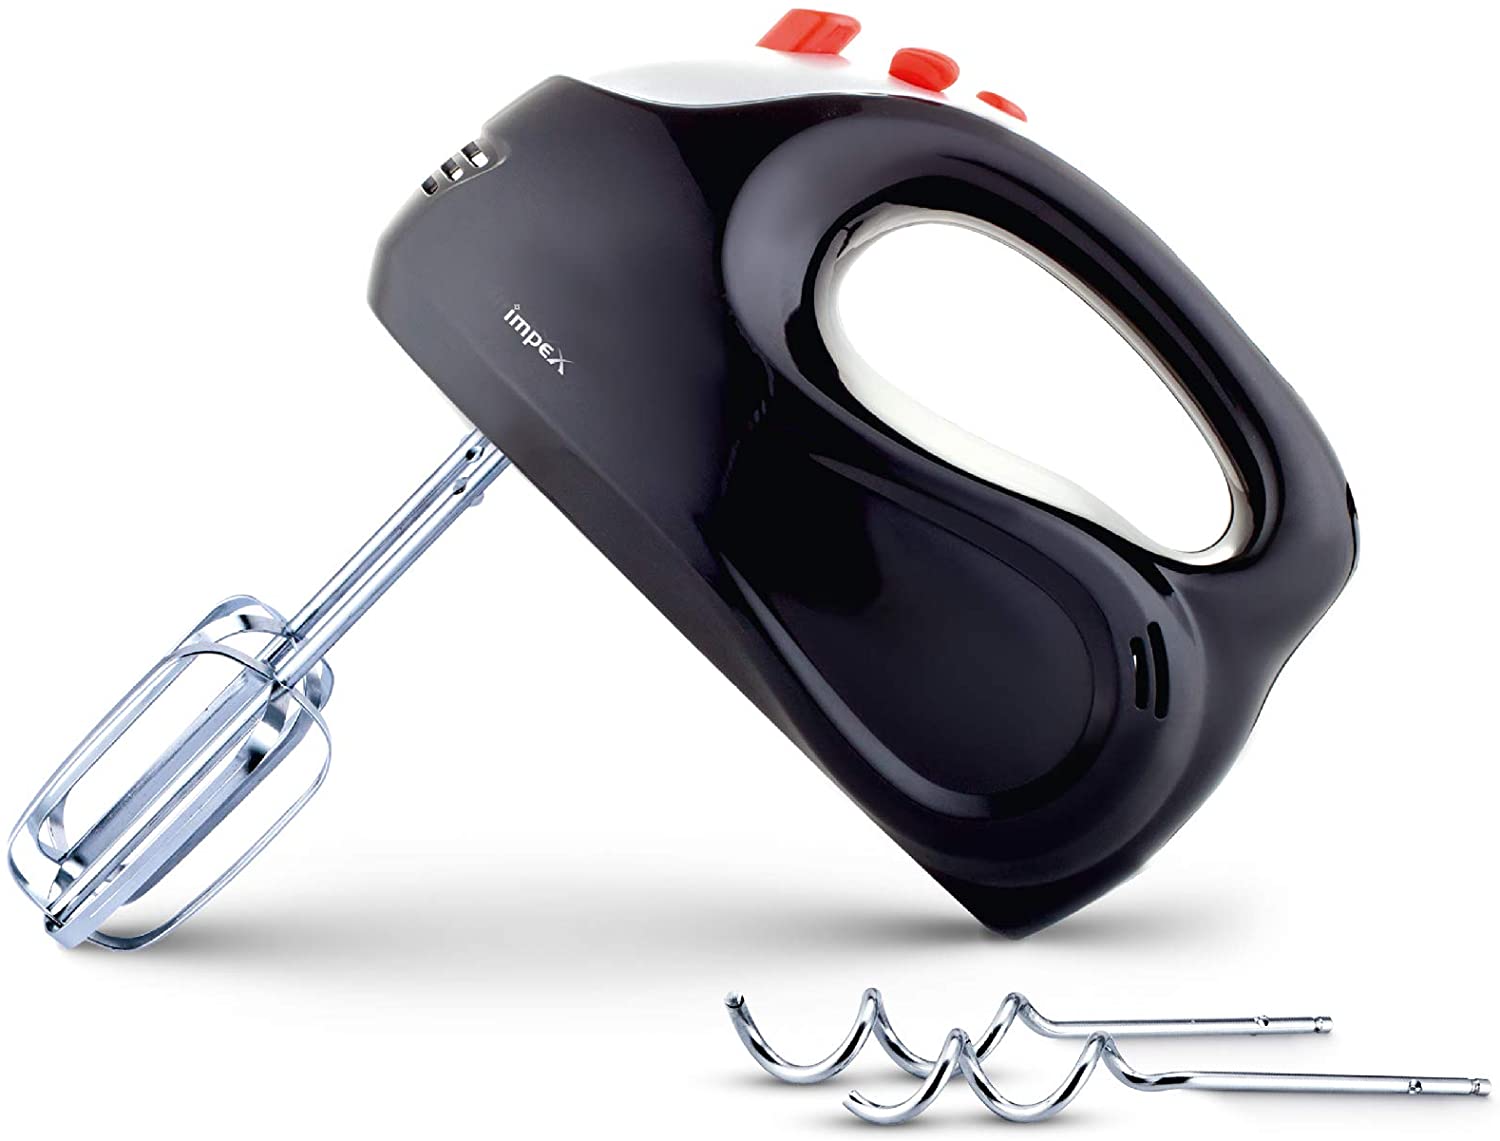 Impex HM 3302 150W Full Copper Motored Low Noise Handheld Hand Mixer with 2 beaters 2 Hooks and 5 Speed Control Turbo Function